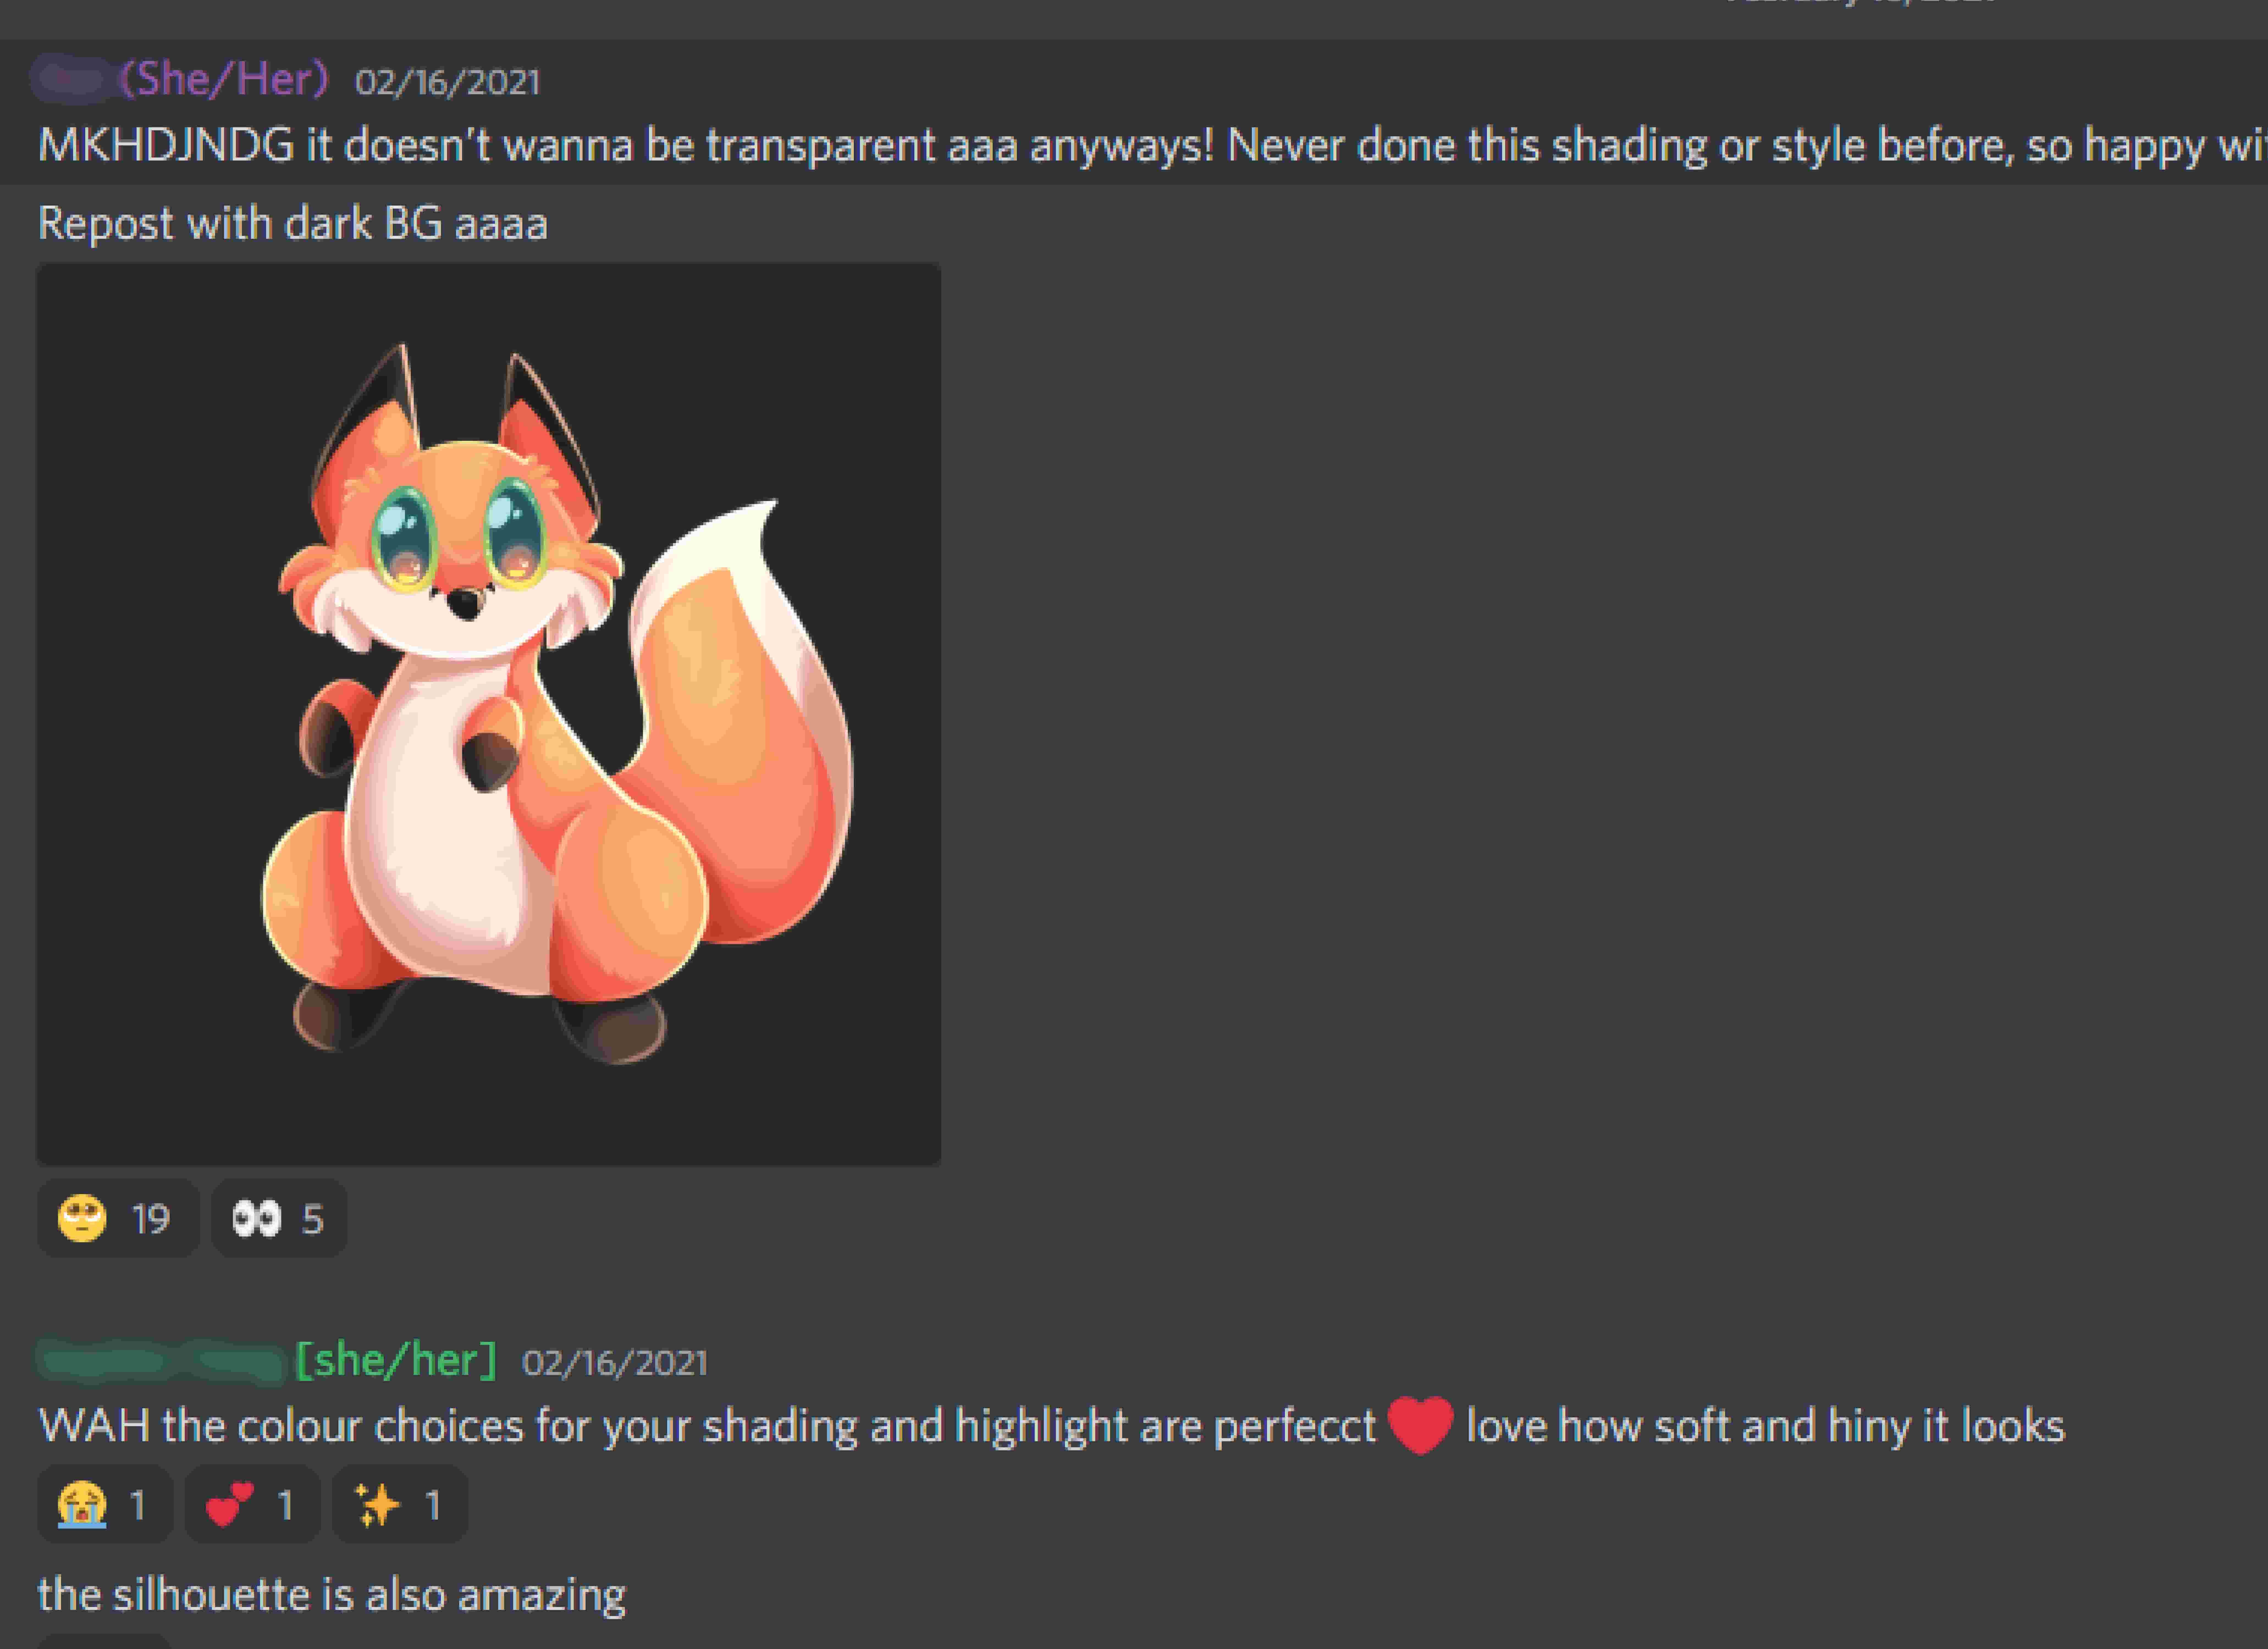 Screenshot from Discord showing a drawing of a fox and a student's positive comment underneath